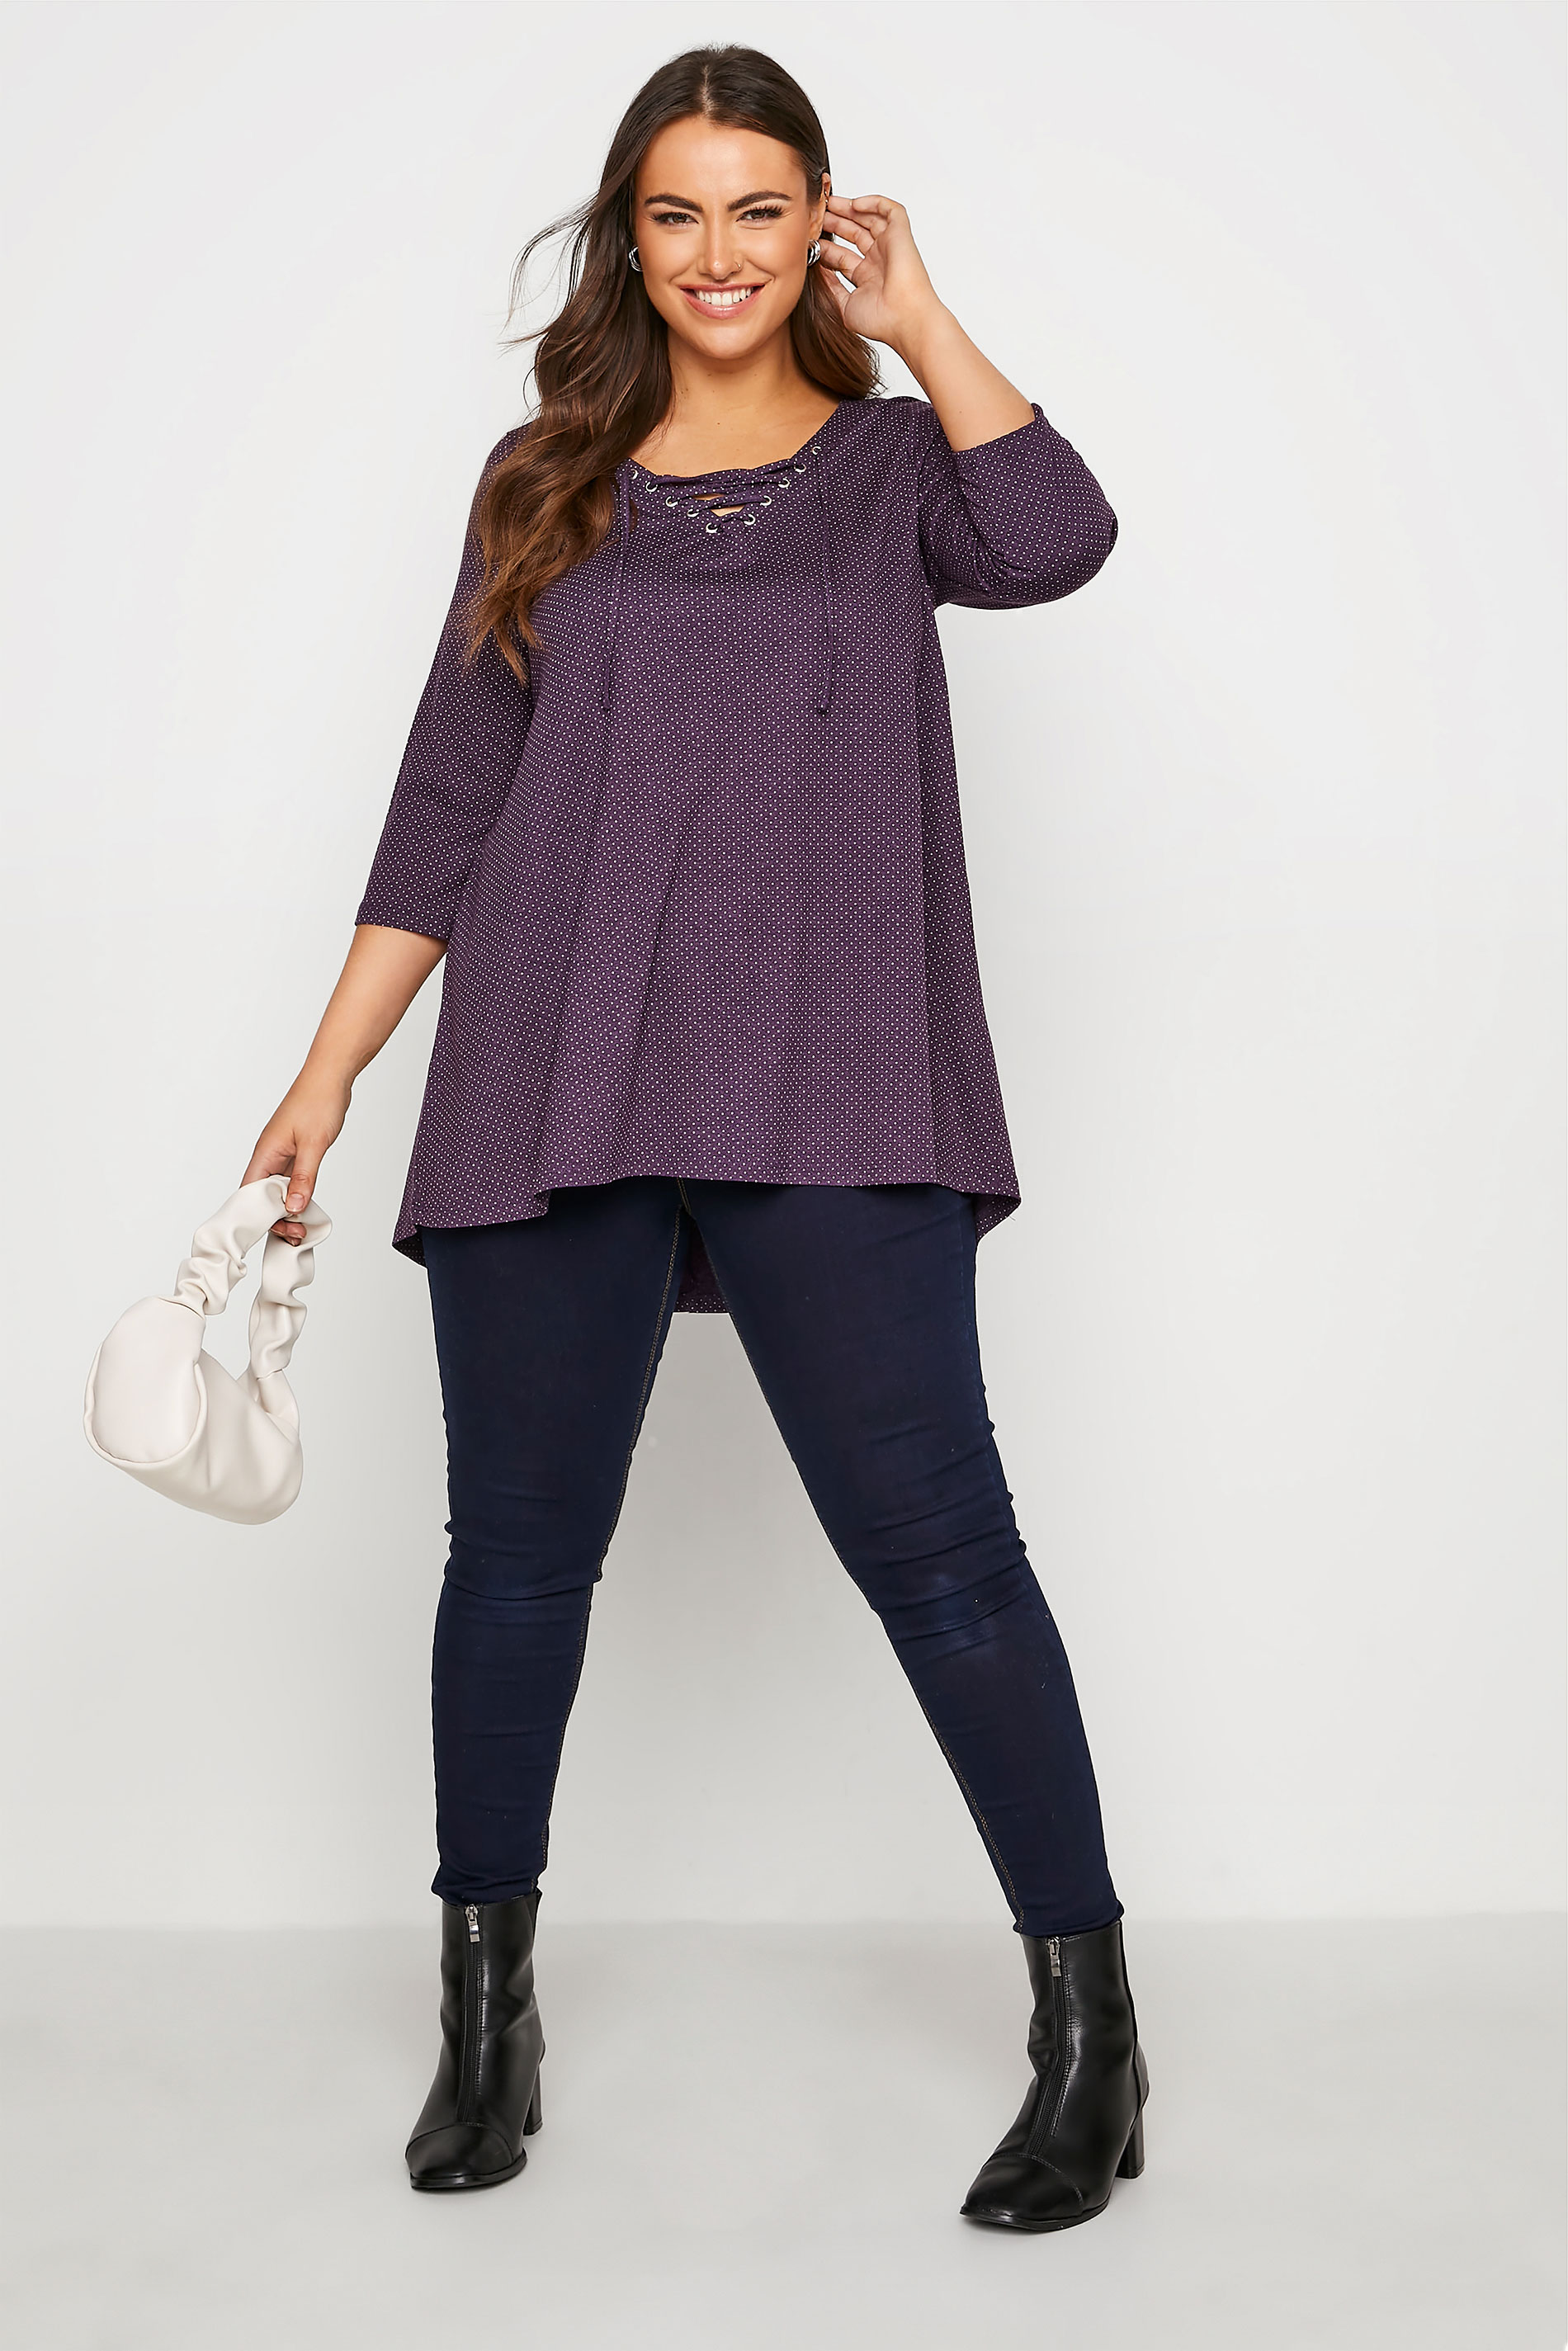 Grande taille  Tops Grande taille  Tops Jersey | Top Violet à Pois Manches Longues - FY90689